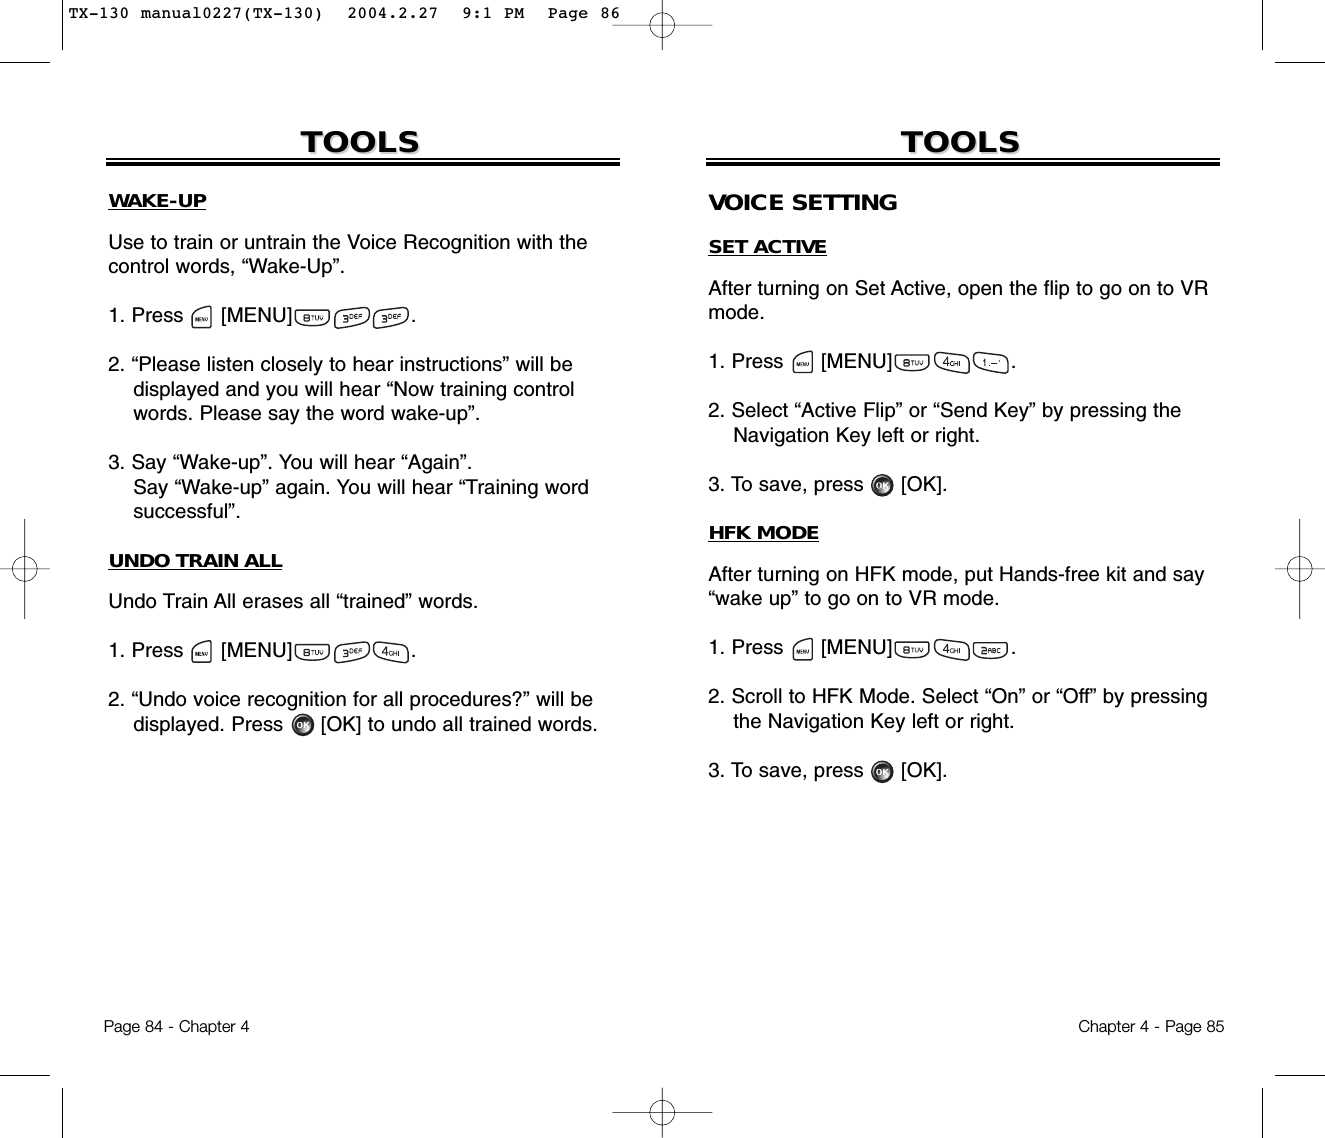 Page 84 - Chapter 4TOOLSTOOLSWAKE-UPUse to train or untrain the Voice Recognition with thecontrol words, “Wake-Up”.1. Press      [MENU]                   .2. “Please listen closely to hear instructions” will be displayed and you will hear “Now training control words. Please say the word wake-up”.3. Say “Wake-up”. You will hear “Again”. Say “Wake-up” again. You will hear “Training wordsuccessful”.UNDO TRAIN ALLUndo Train All erases all “trained” words.1. Press      [MENU]                   .2. “Undo voice recognition for all procedures?” will be displayed. Press [OK] to undo all trained words.Chapter 4 - Page 85TOOLSTOOLSVOICE SETTINGSET ACTIVEAfter turning on Set Active, open the flip to go on to VRmode.1. Press      [MENU]                   .2. Select “Active Flip” or “Send Key” by pressing the Navigation Key left or right.3. To save, press [OK].HFK MODEAfter turning on HFK mode, put Hands-free kit and say“wake up” to go on to VR mode.1. Press      [MENU]                   .2. Scroll to HFK Mode. Select “On” or “Off” by pressing the Navigation Key left or right.3. To save, press [OK].TX-130 manual0227(TX-130)  2004.2.27  9:1 PM  Page 86